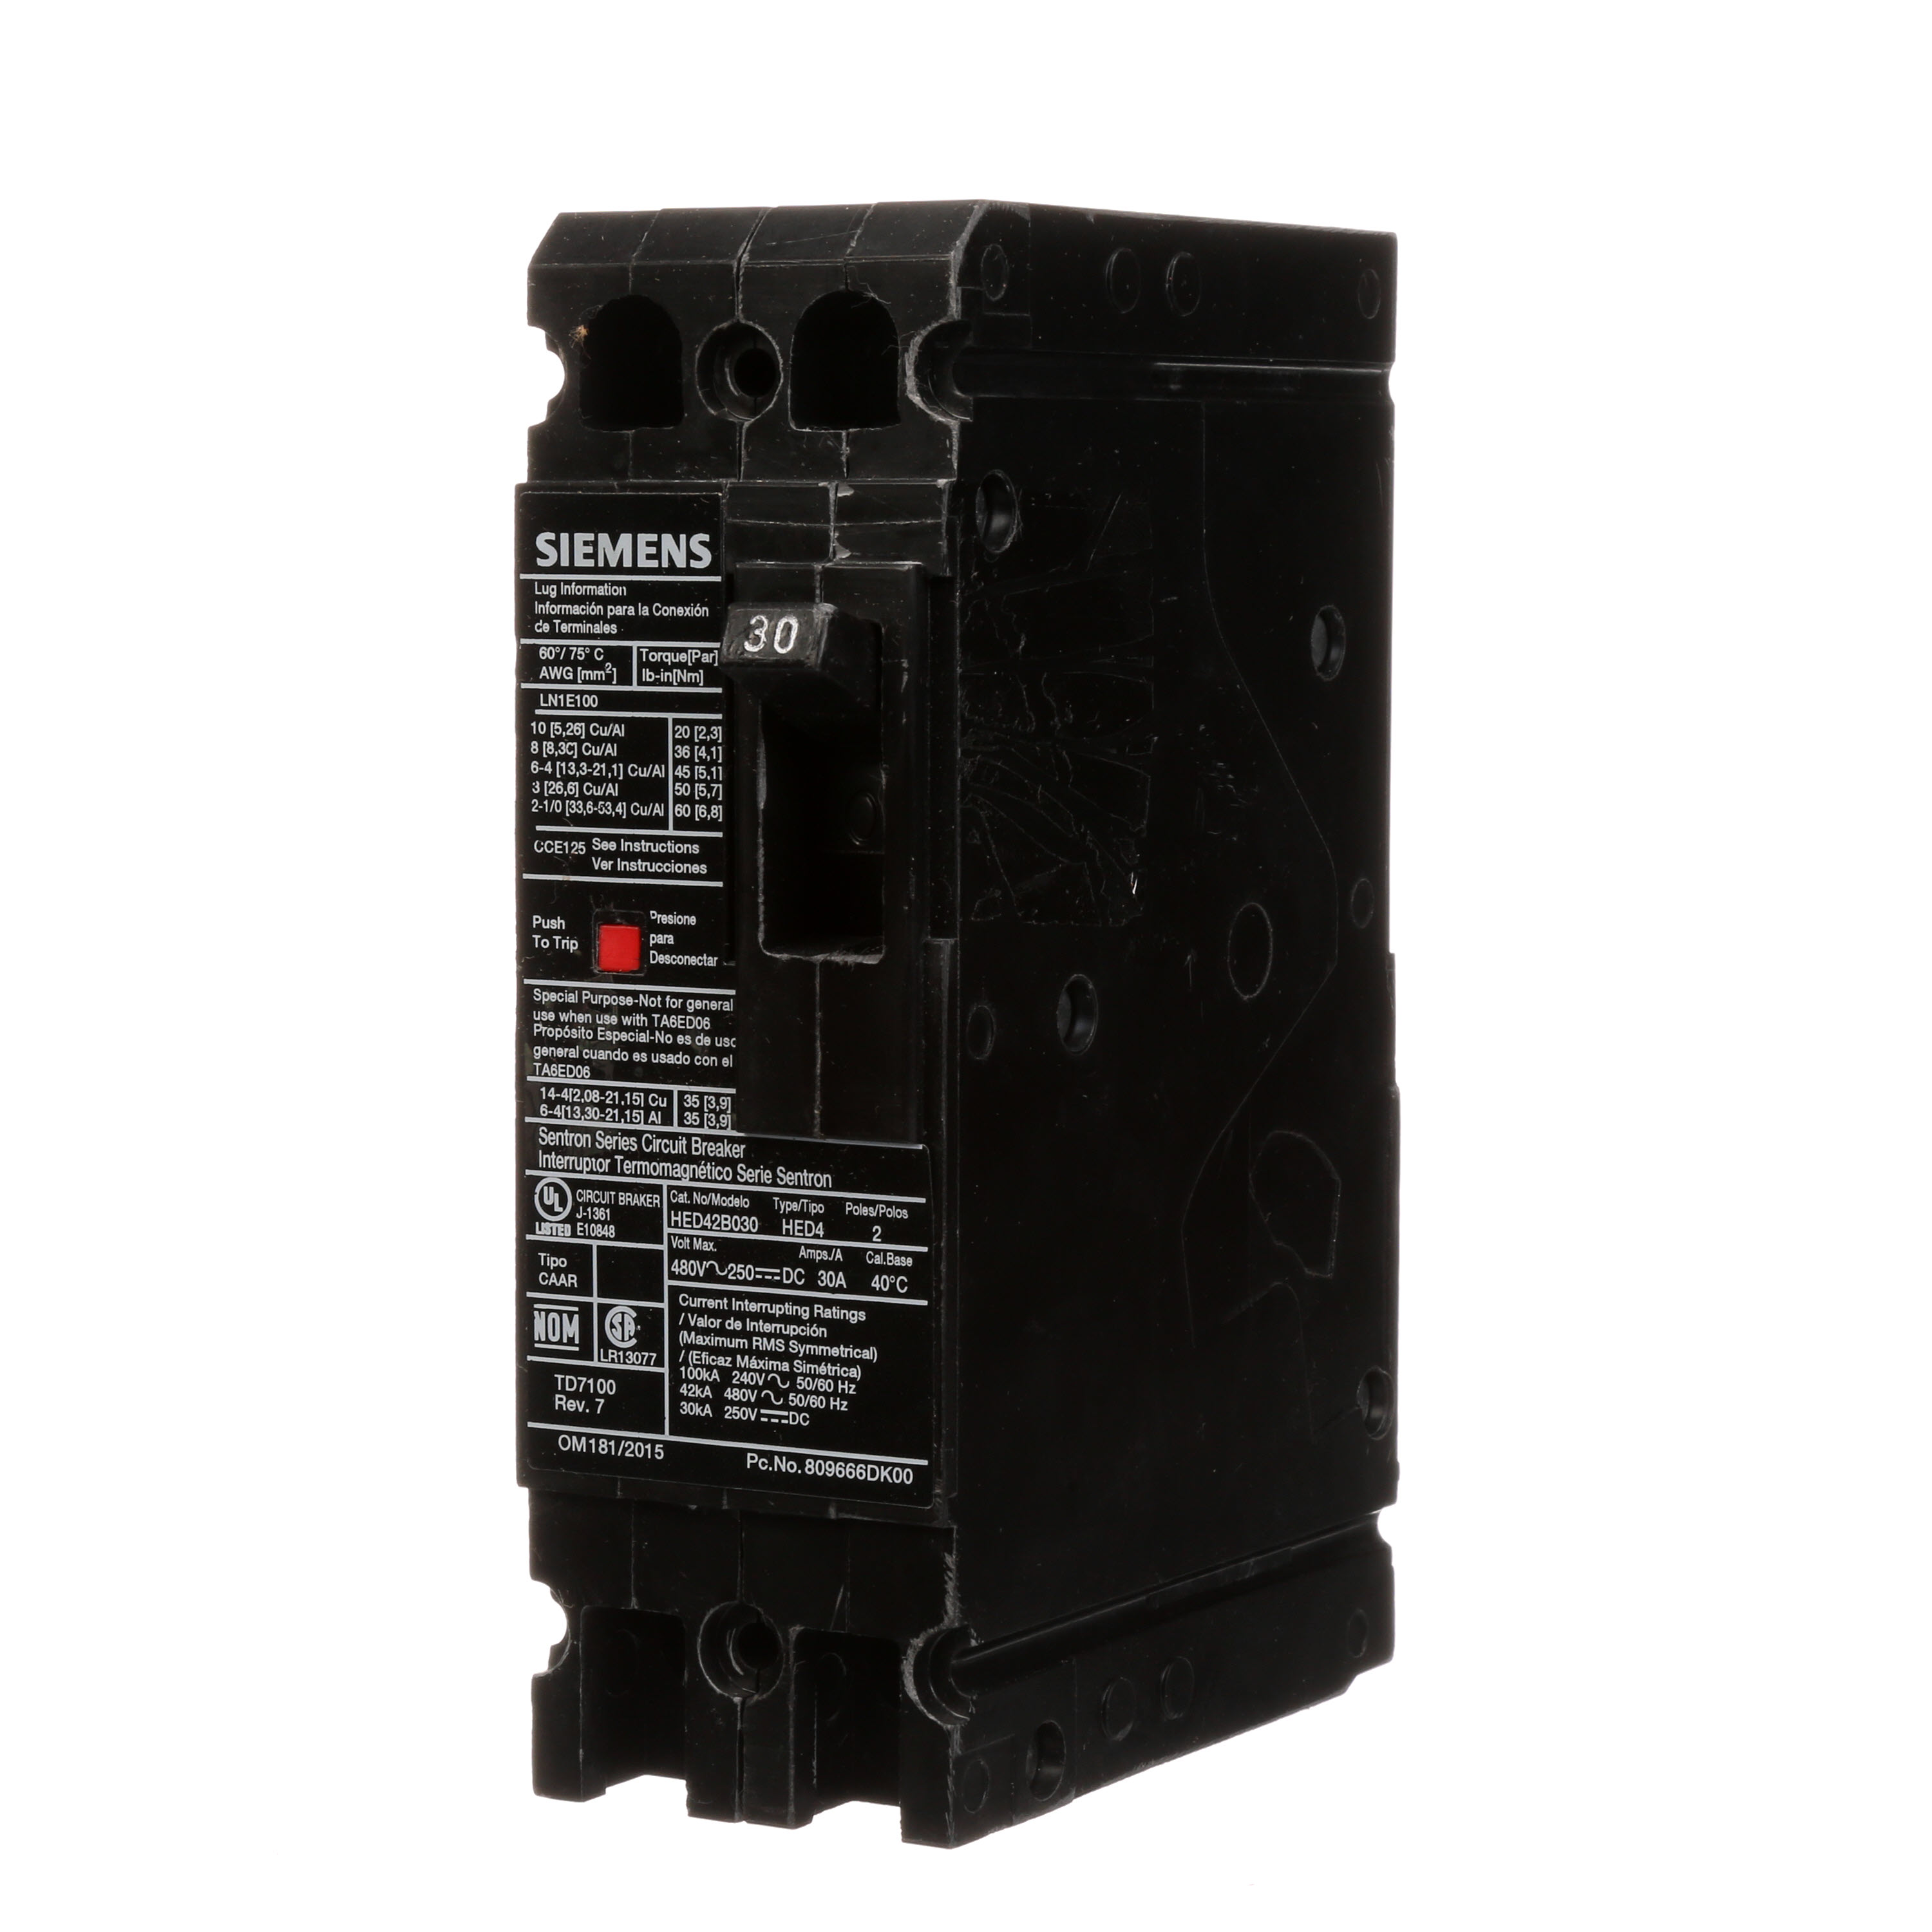 SIEMENS LOW VOLTAGE SENTRON MOLDED CASE CIRCUIT BREAKER WITH THERMAL - MAGNETICTRIP UNIT. STANDARD 40 DEG C BREAKER ED FRAME WITH HIGH BREAKING CAPACITY. 30A 2-POLE (42KAIC AT 480V). NON-INTERCHANGEABLE TRIP UNIT. SPECIAL FEATURES LOAD LUGS ONLY (LN1E100) WIRE RANGE 10 - 1/0AWG (CU/AL). DIMENSIONS (W x H x D) IN 2.00x 6.4 x 3.92.